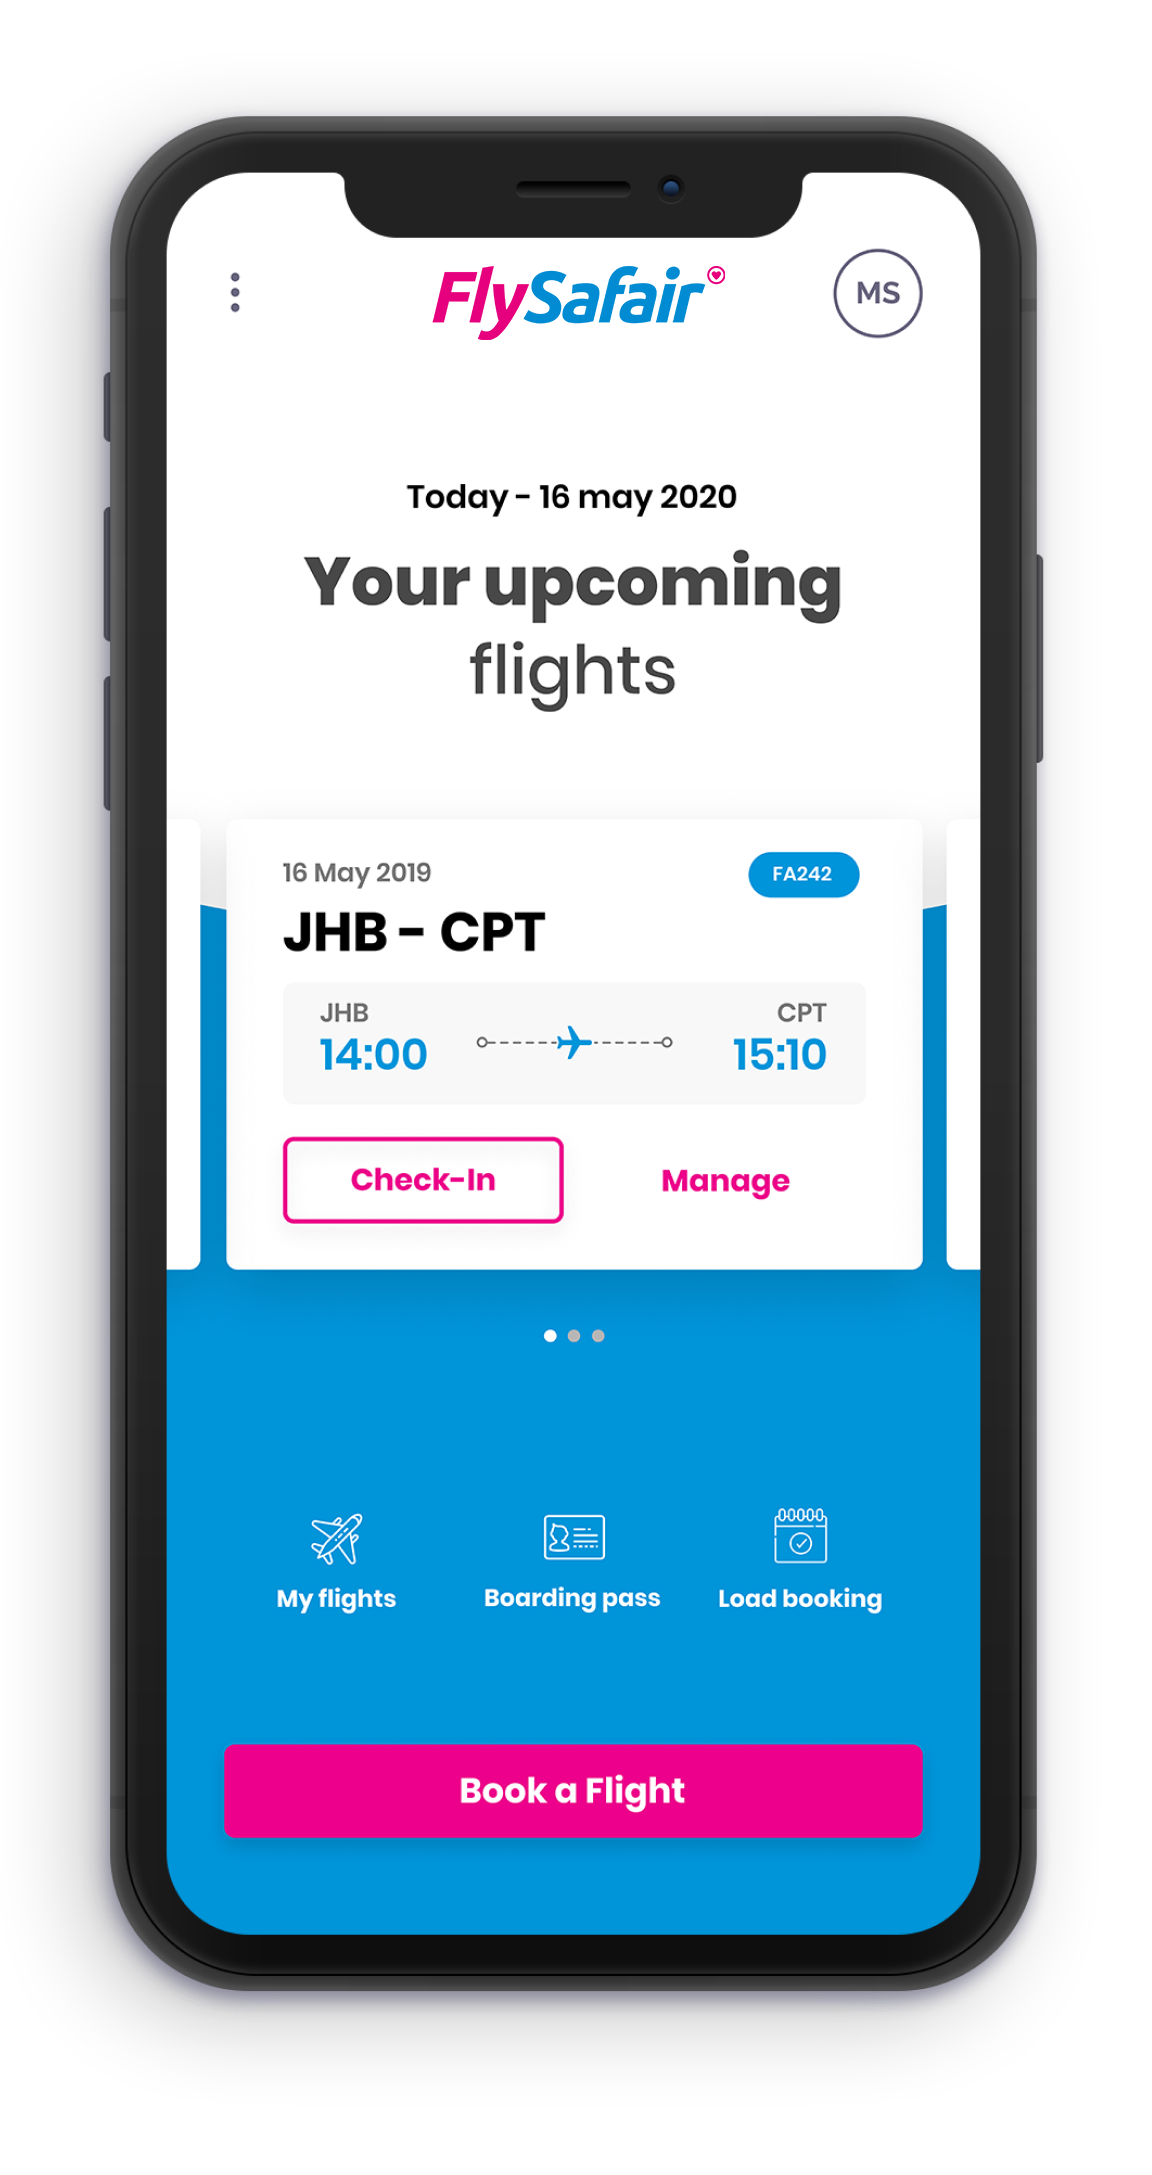 Flysafair App home screen displayed on an iPhone